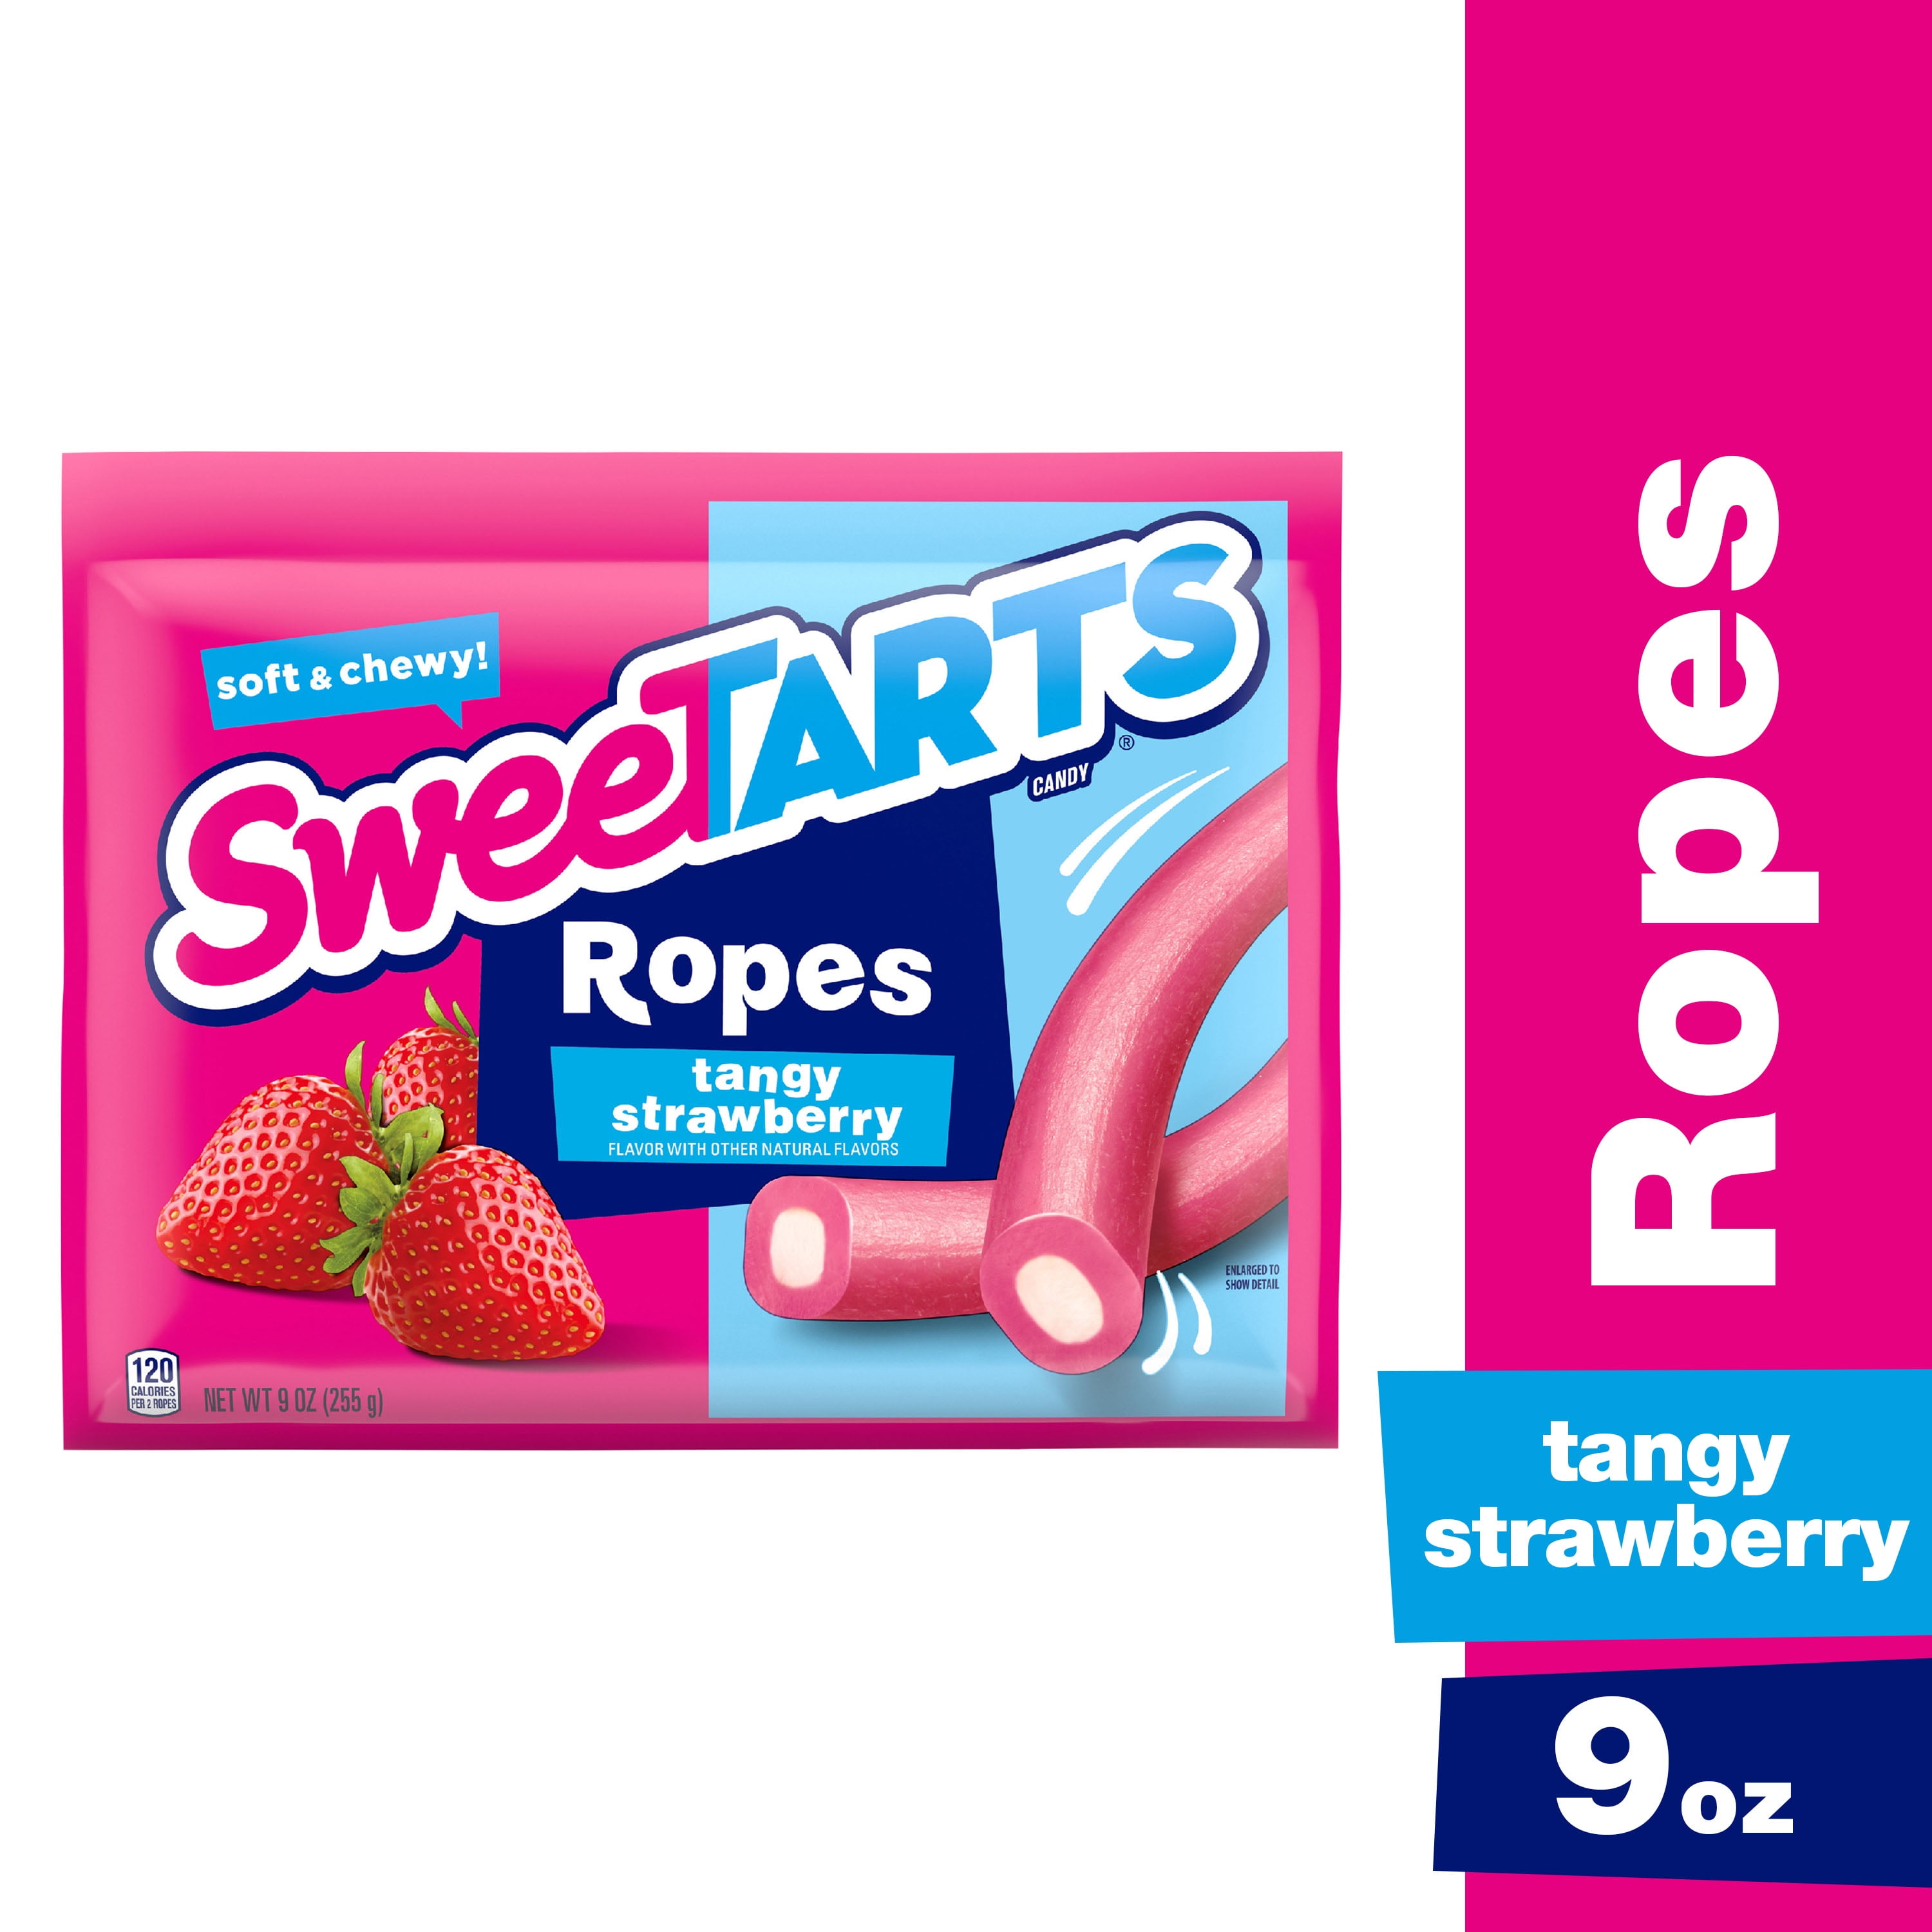 SweeTARTs Soft & Chewy Ropes Tangy Strawberry Candy, 9 oz